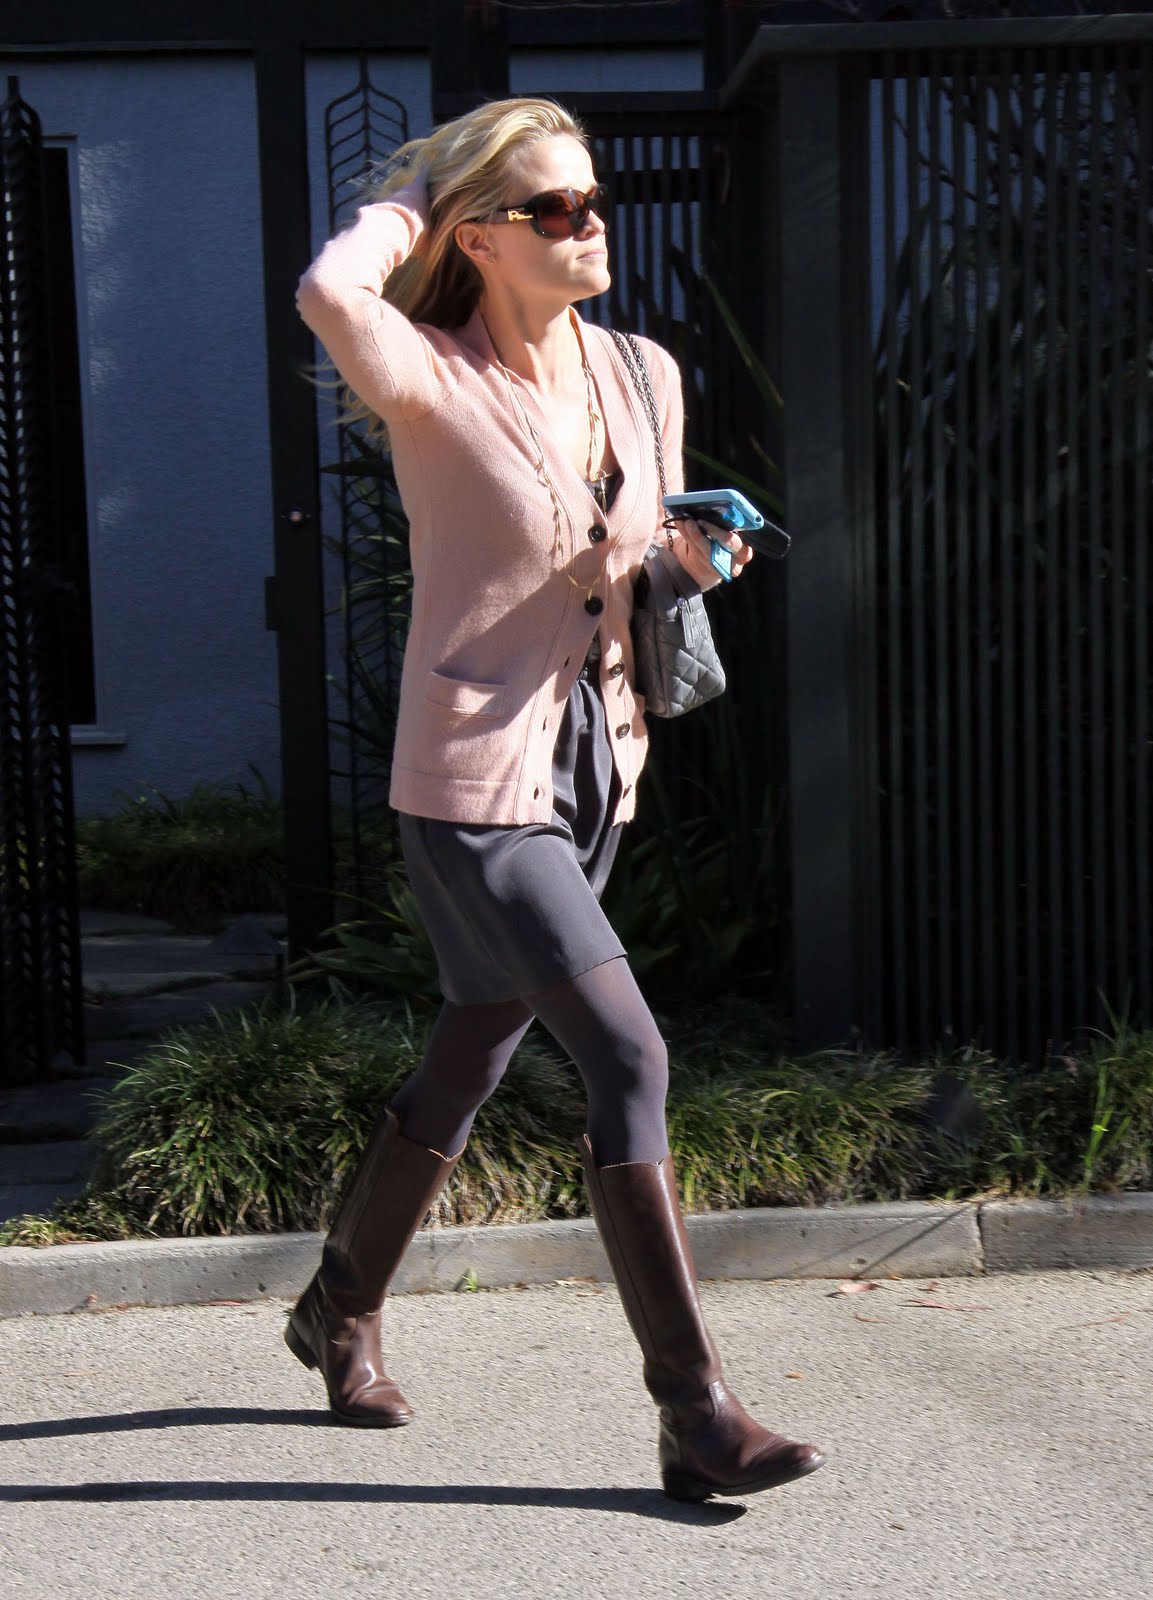 [Reese_Witherspoon_-_Leaving_a_friend's_house_in_Brentwood_04.12.2009_.jpg]